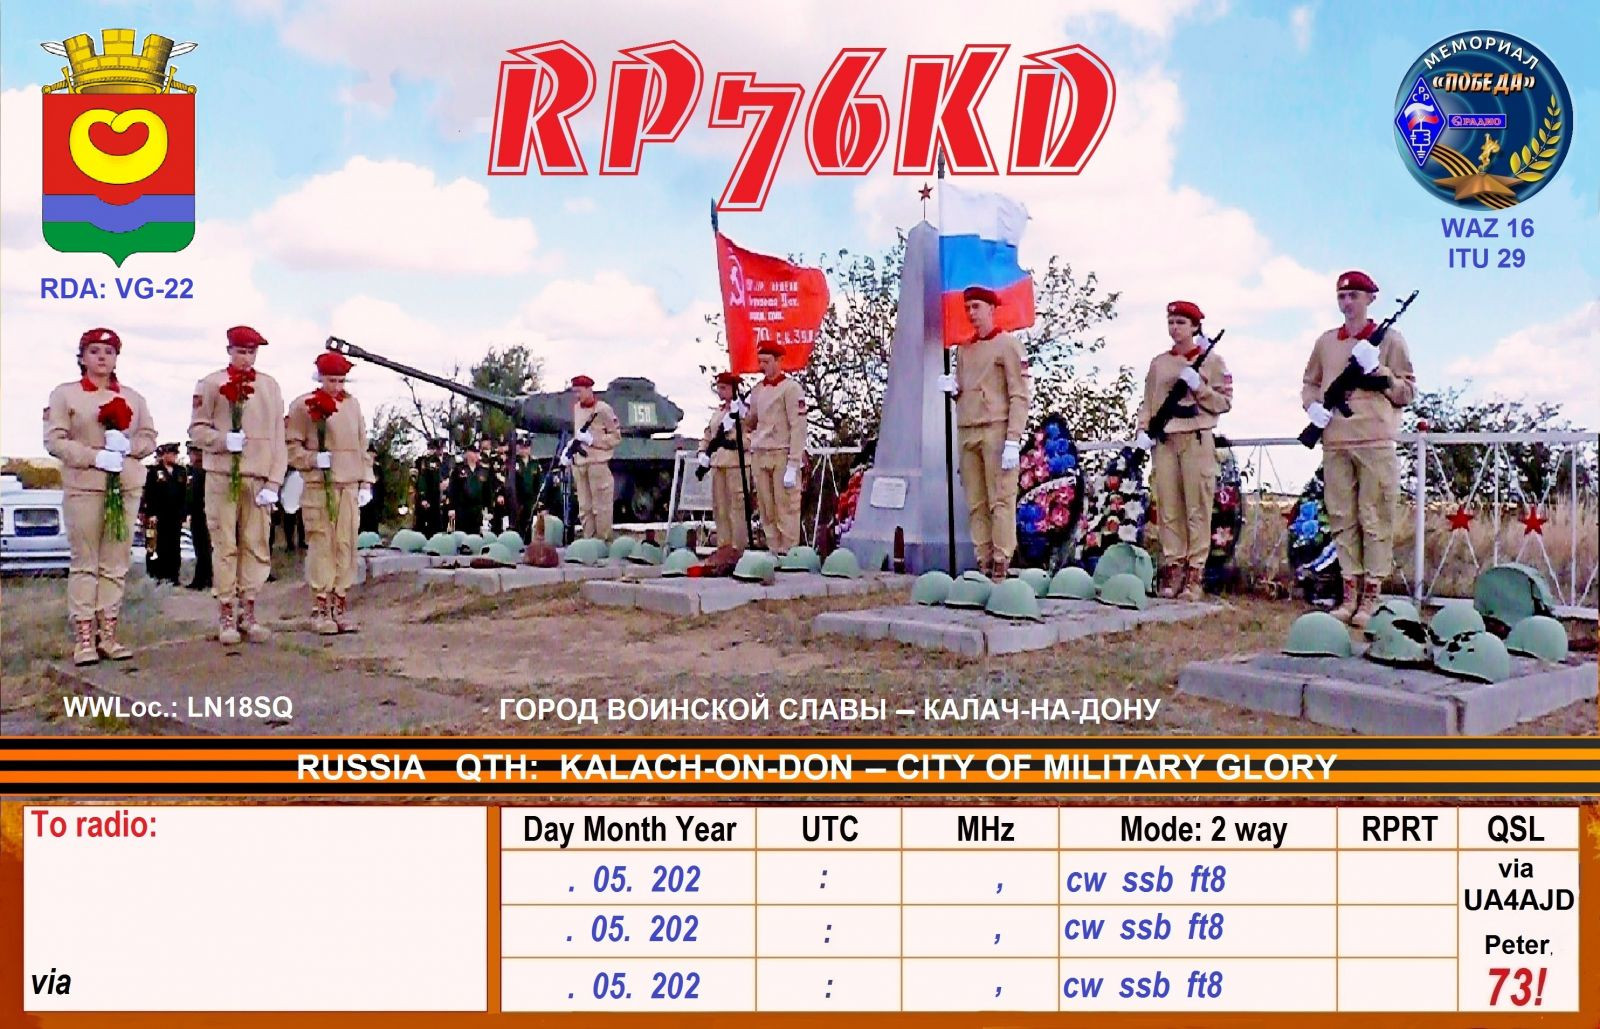 RP76KD Kalach on Don, Russia